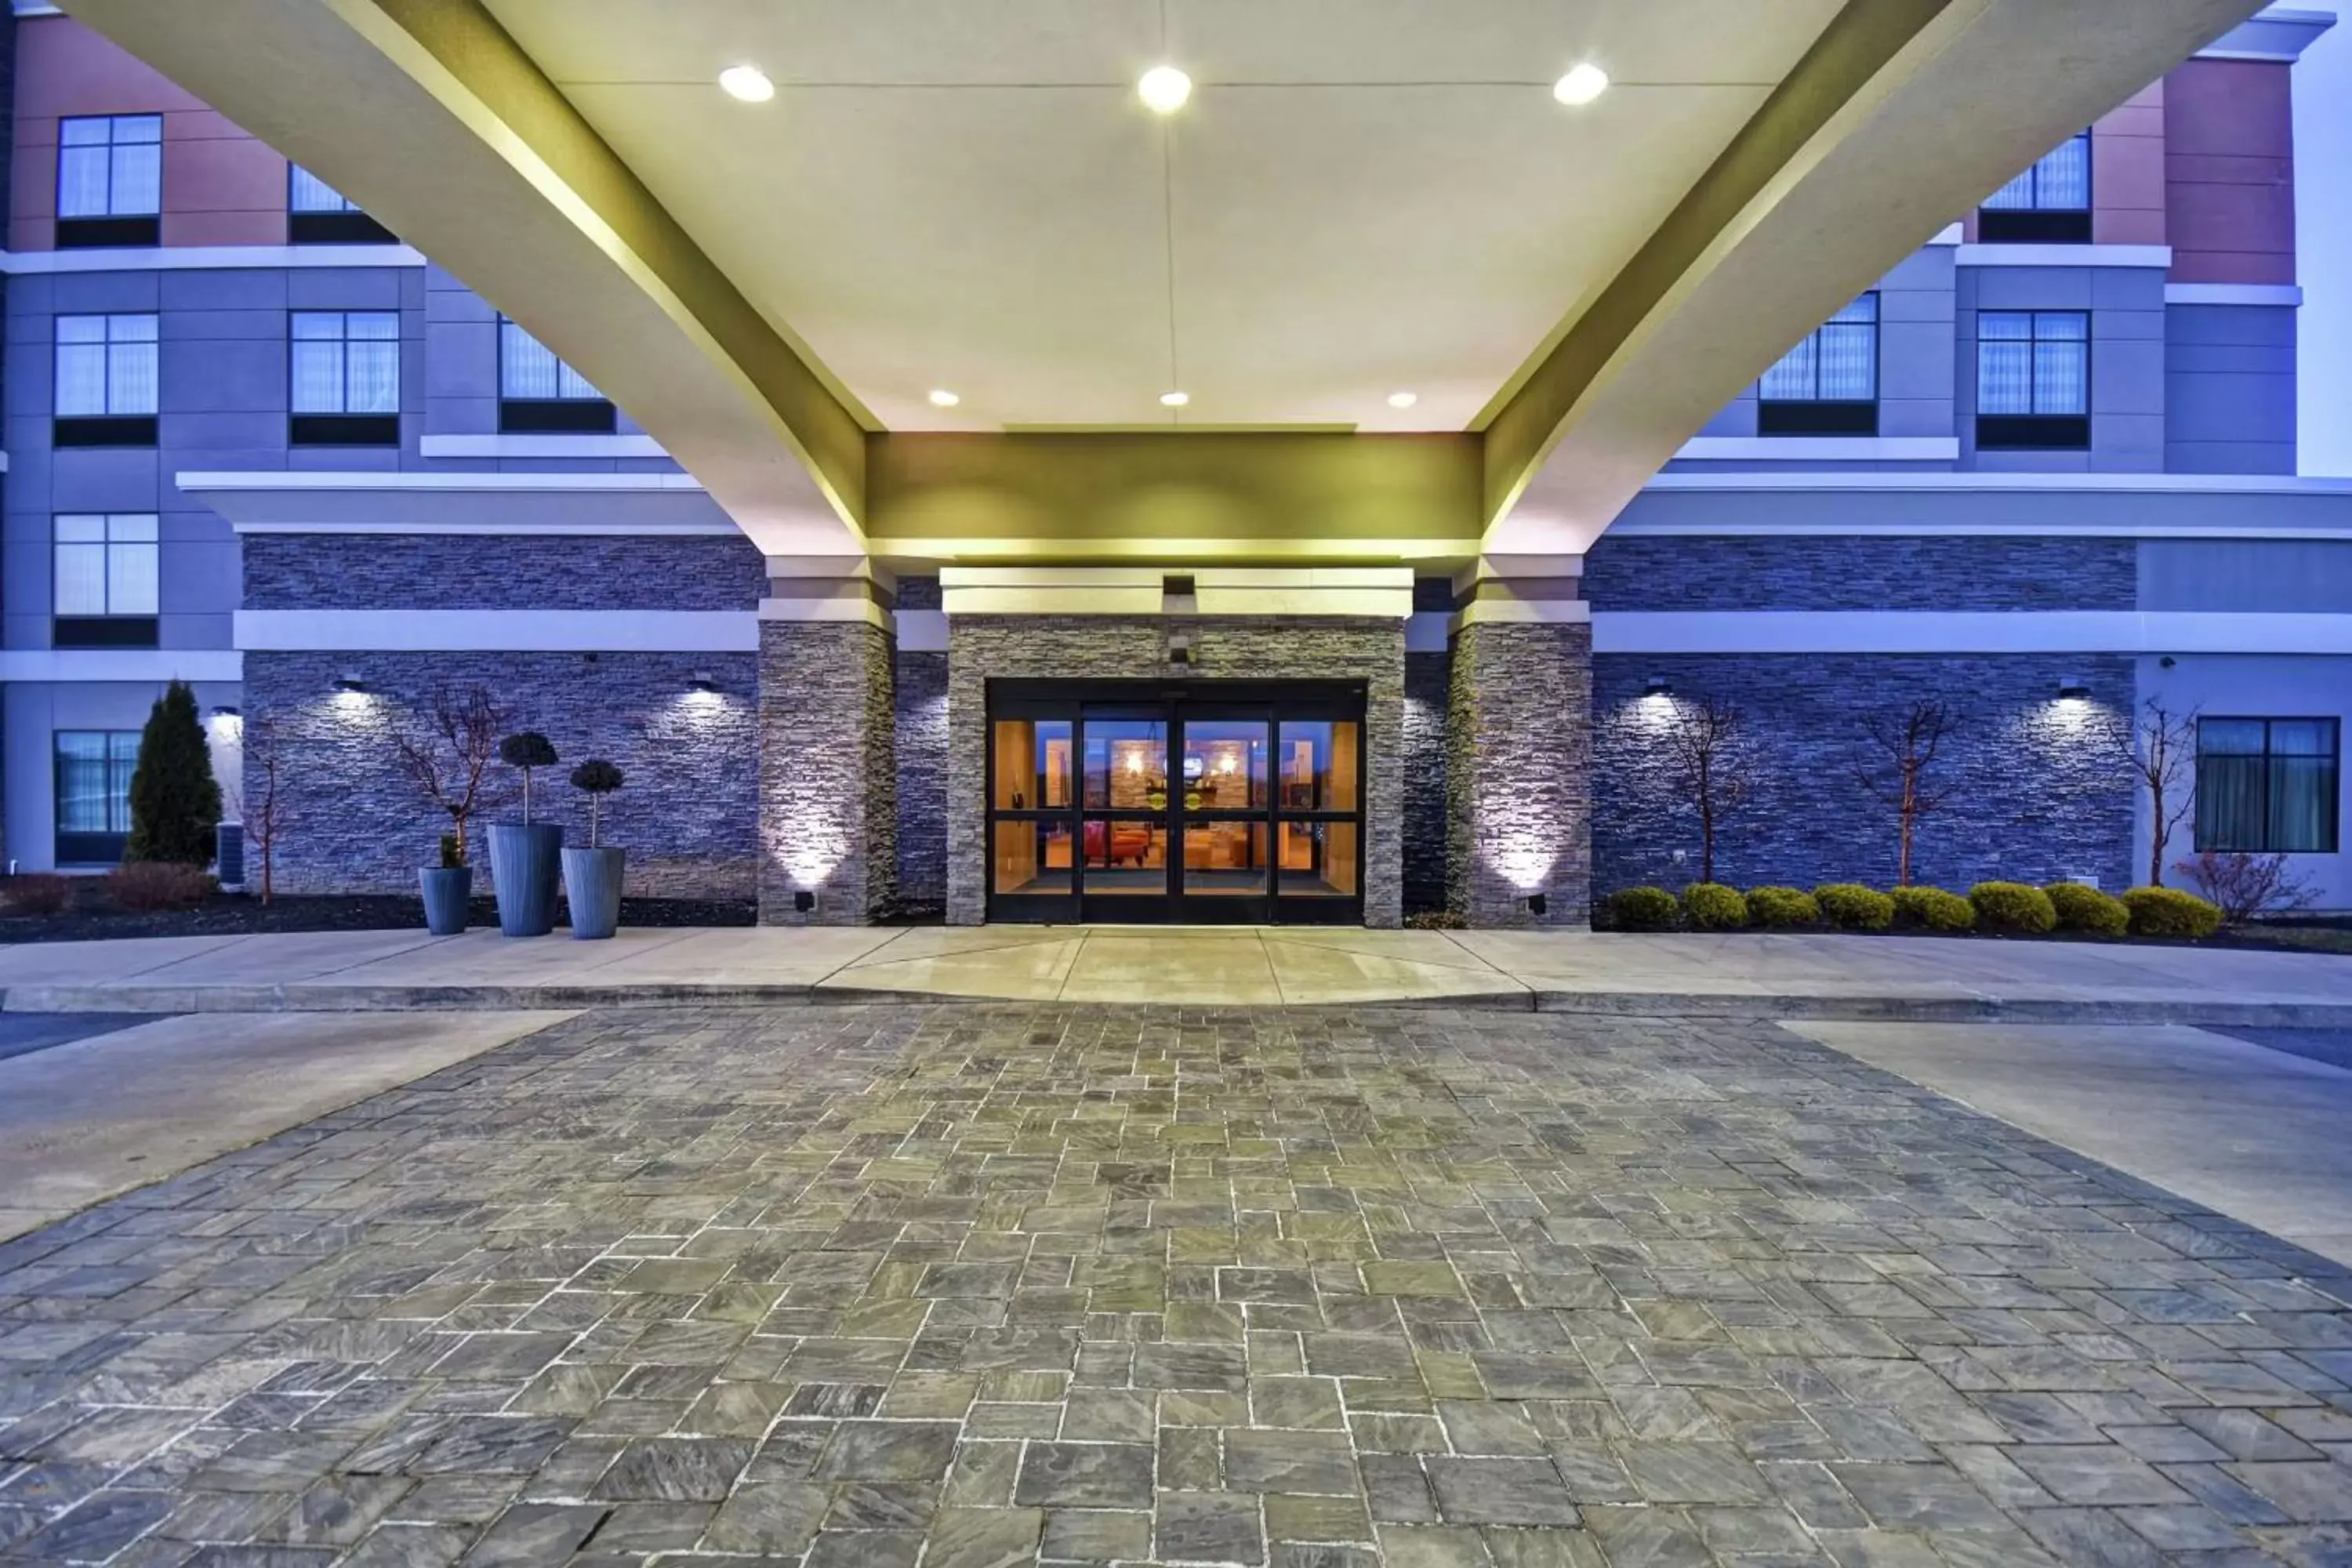 Property building in Homewood Suites By Hilton Dubois, Pa